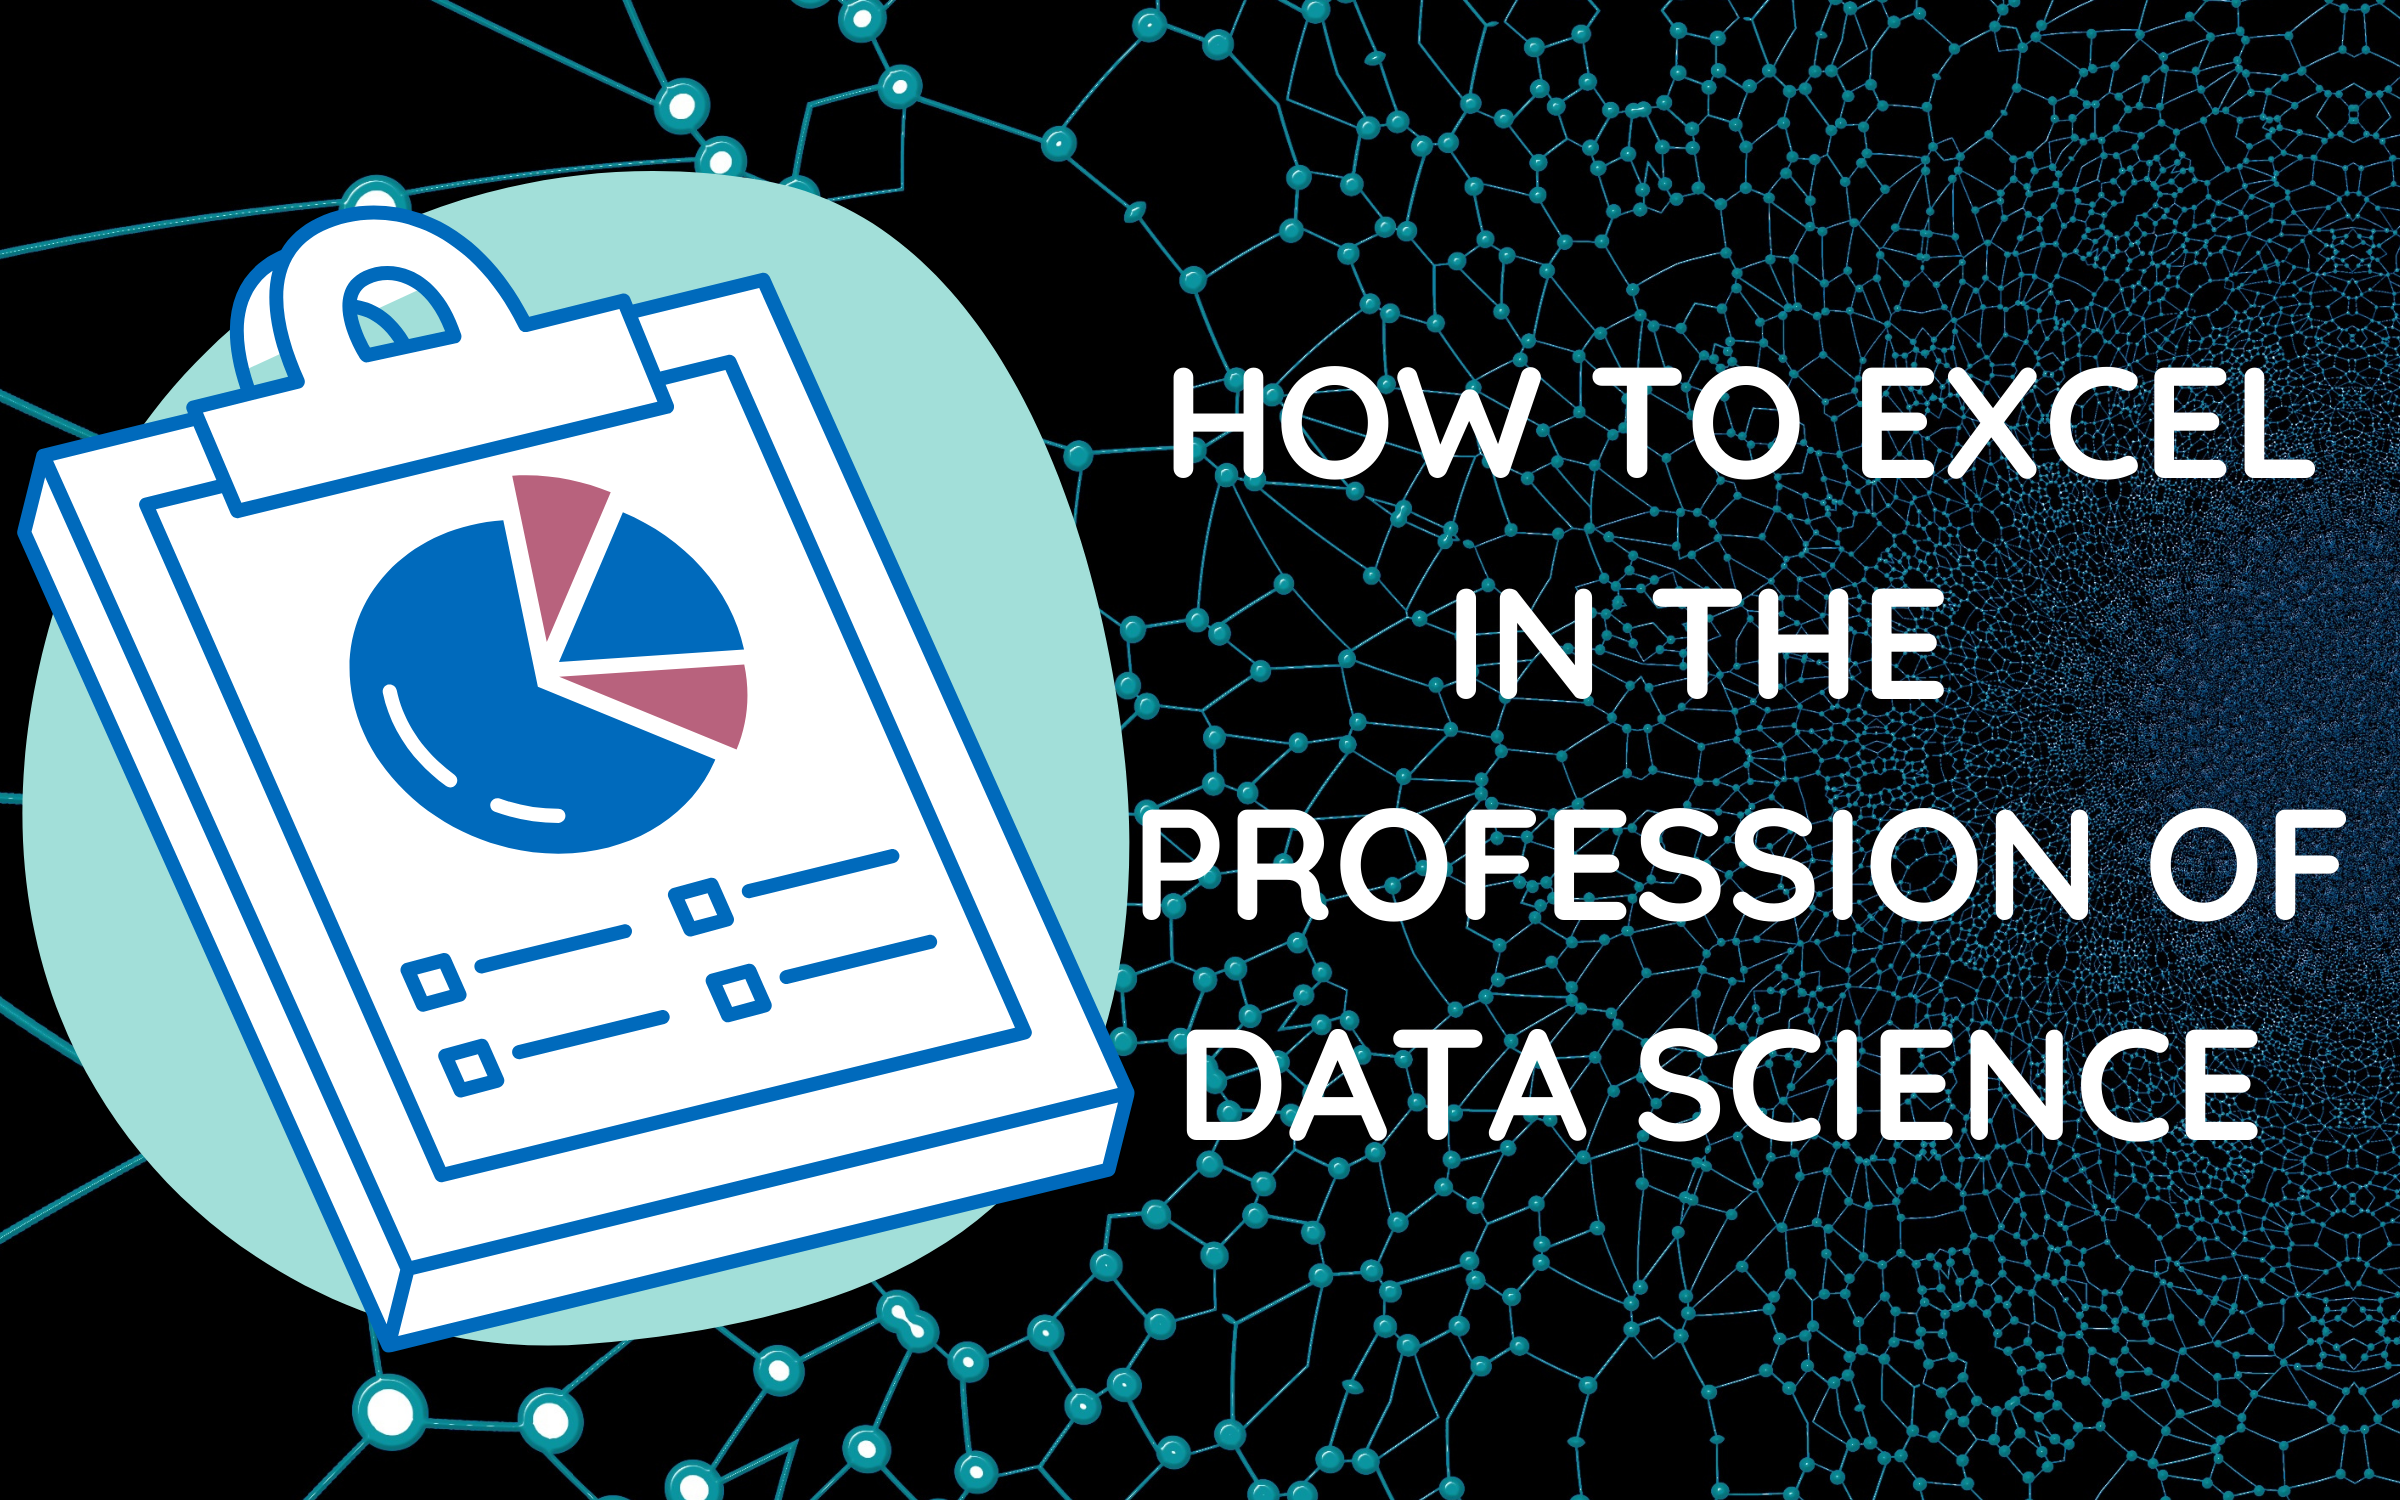 What does it takes to excel in the profession of Data Science